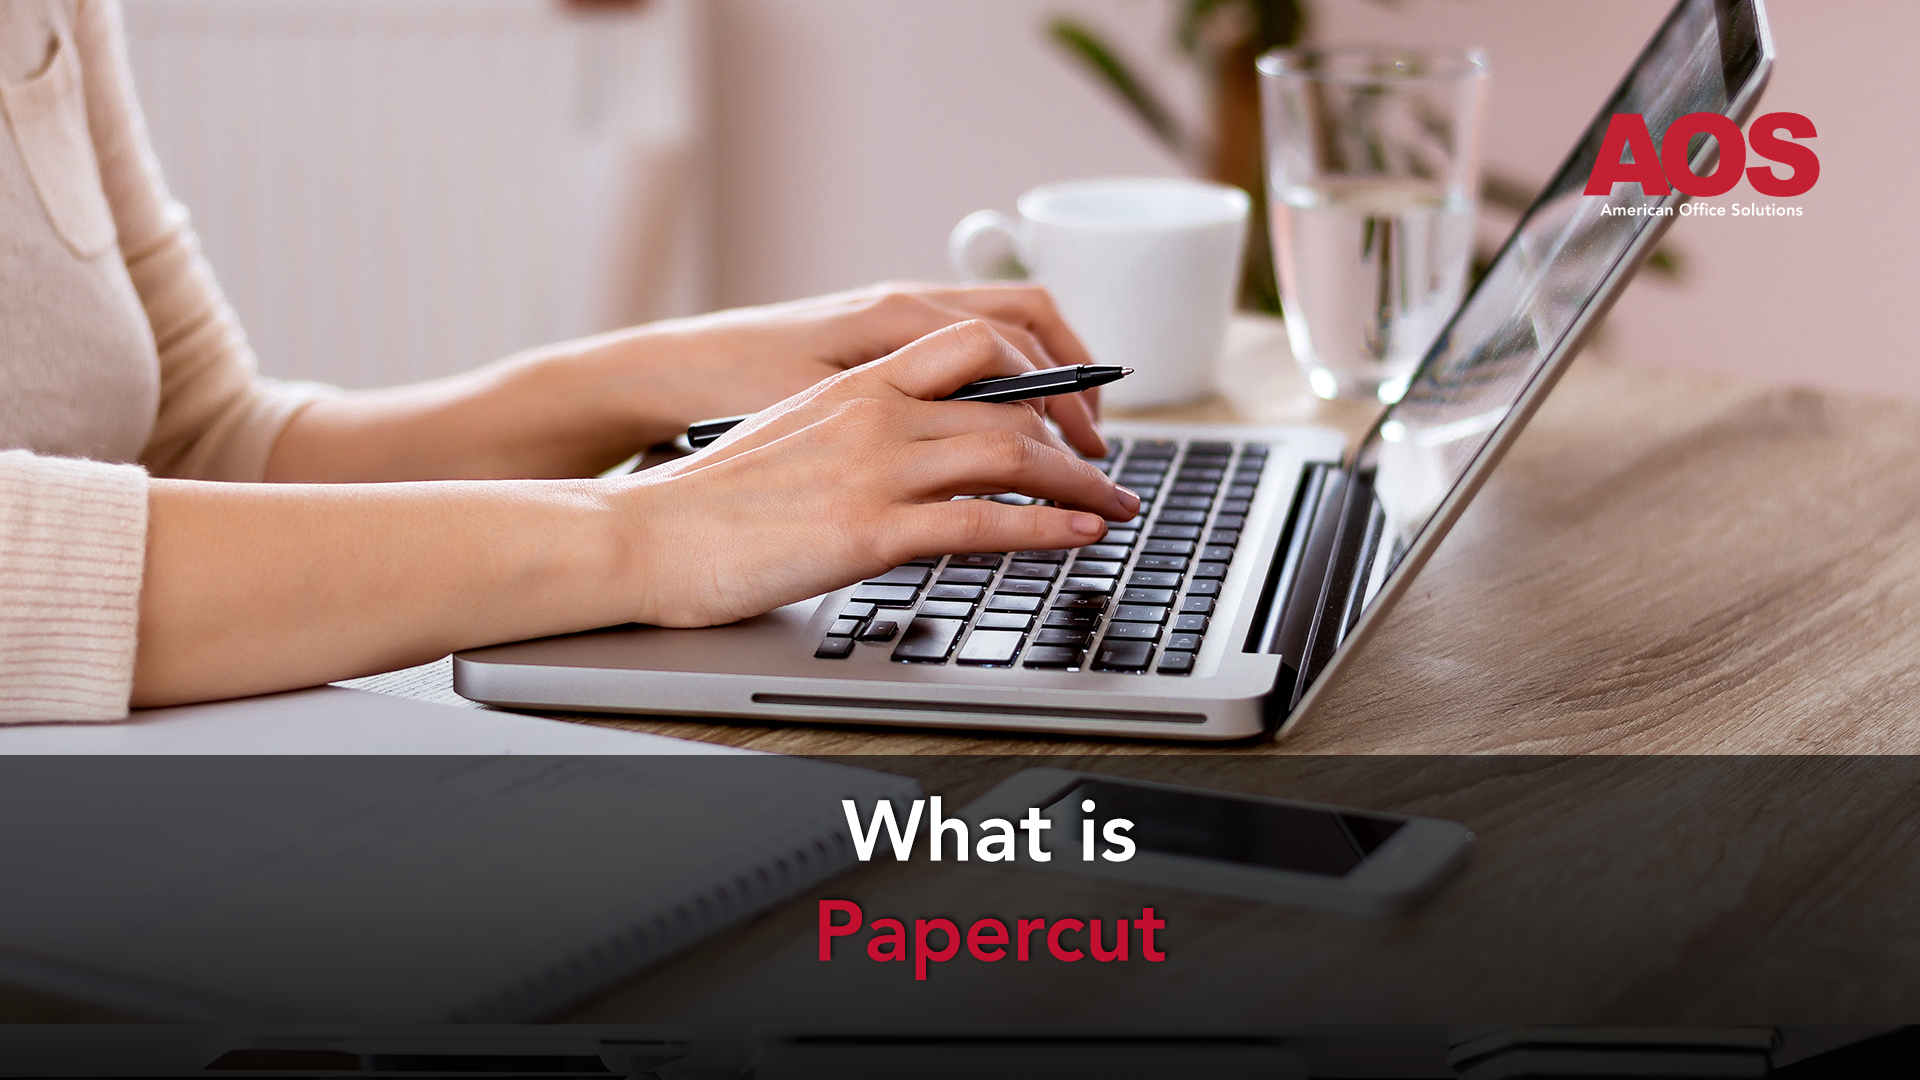 What is Papercut